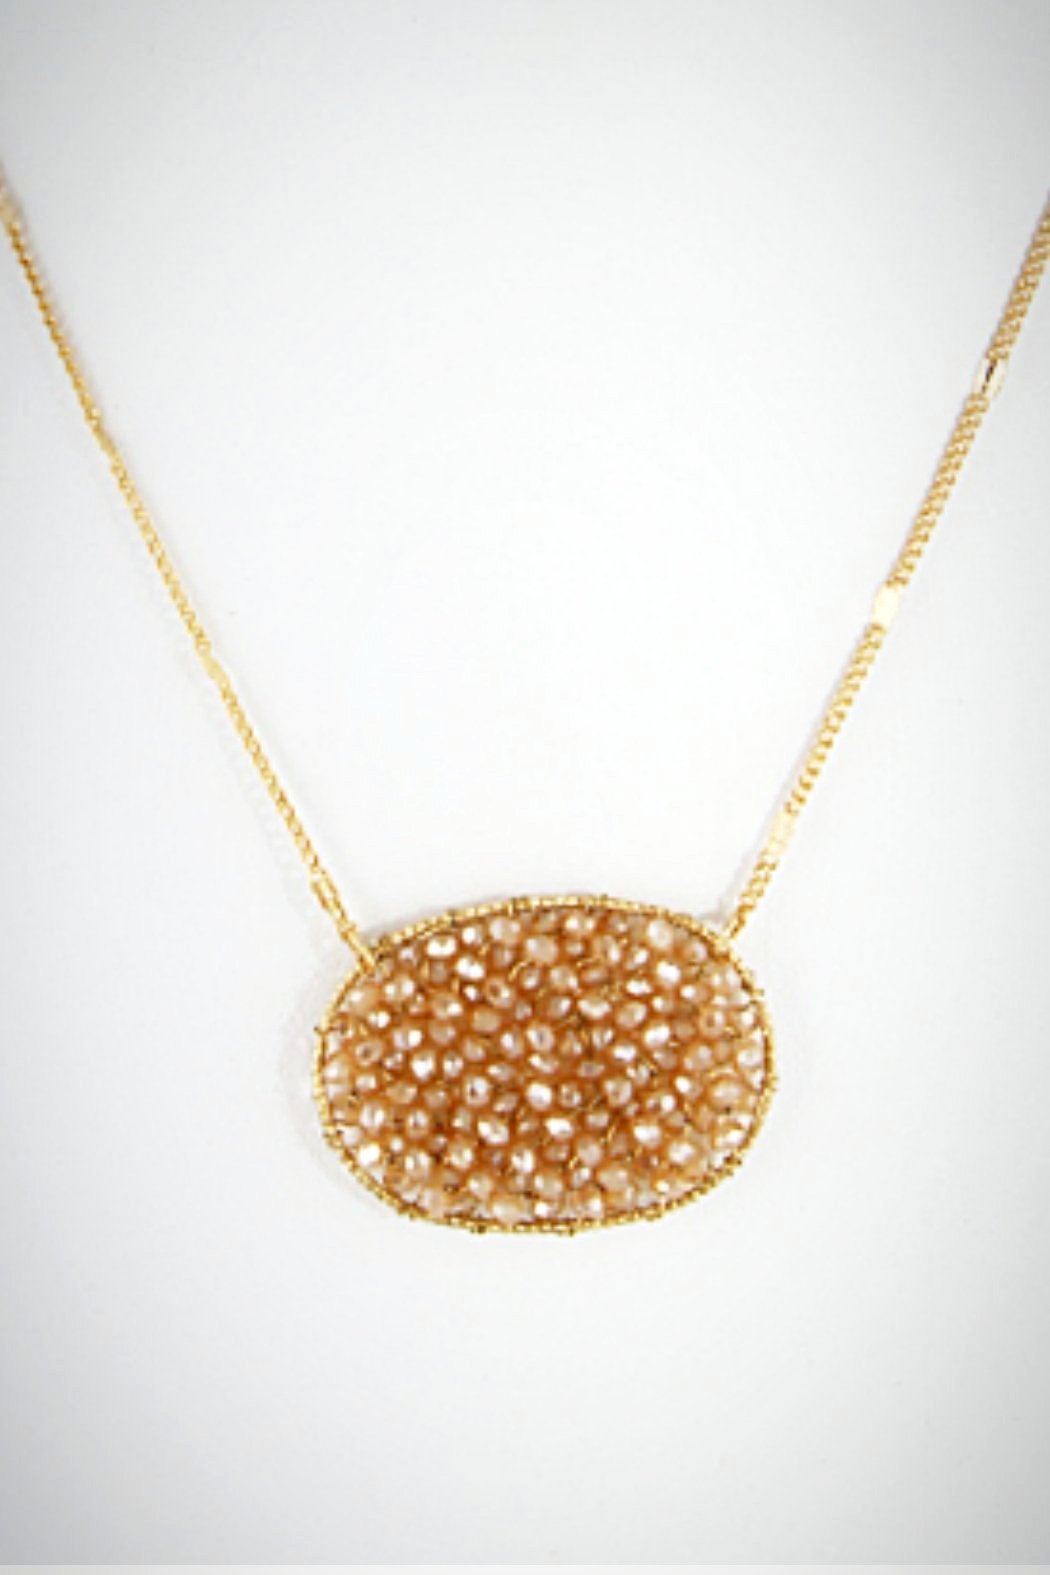 Champagne Necklace - Embellish Your Life 